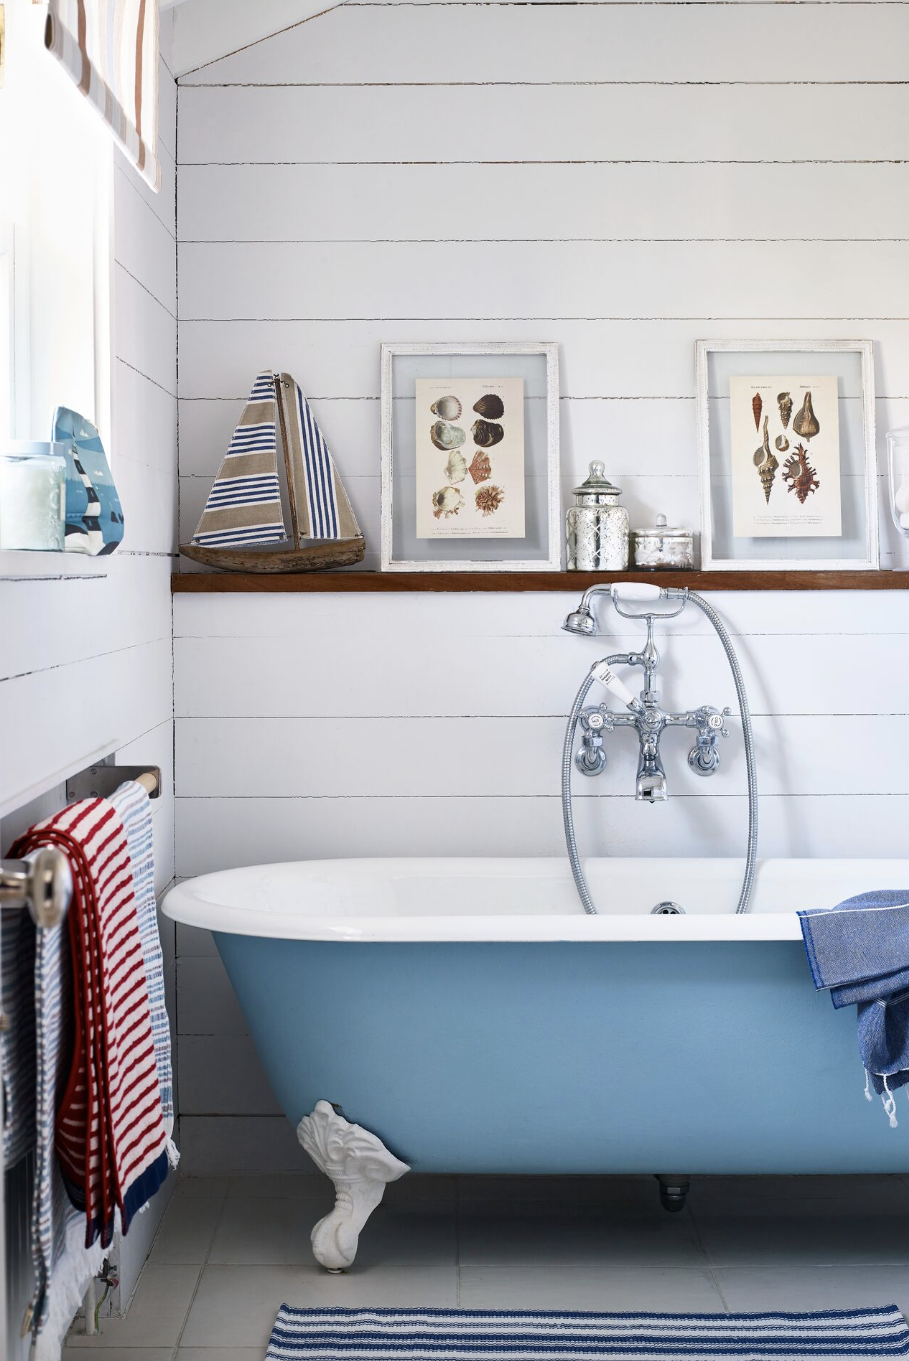 bathroom storage ideas, wooden ledge over the blue tub with a white rim